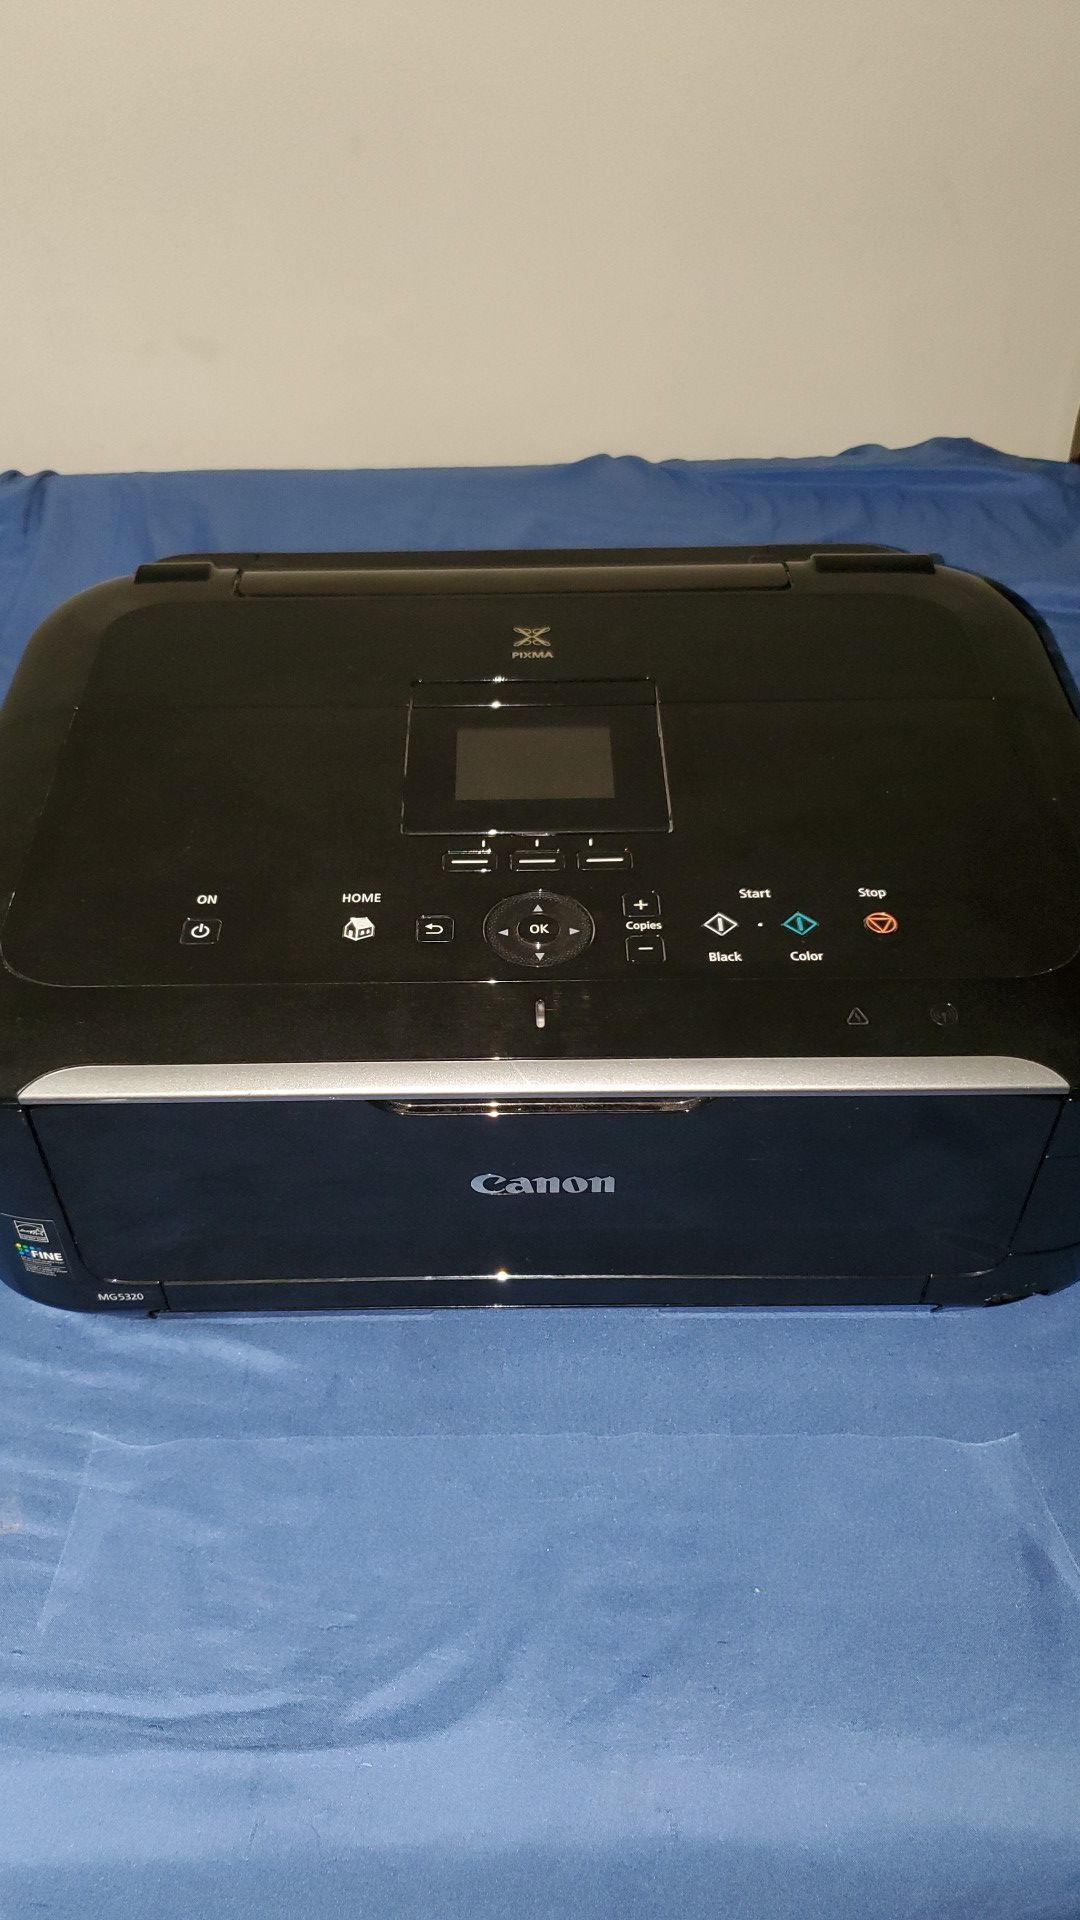 Ps4,ps3 and controller,printer,and a window 10 computer,